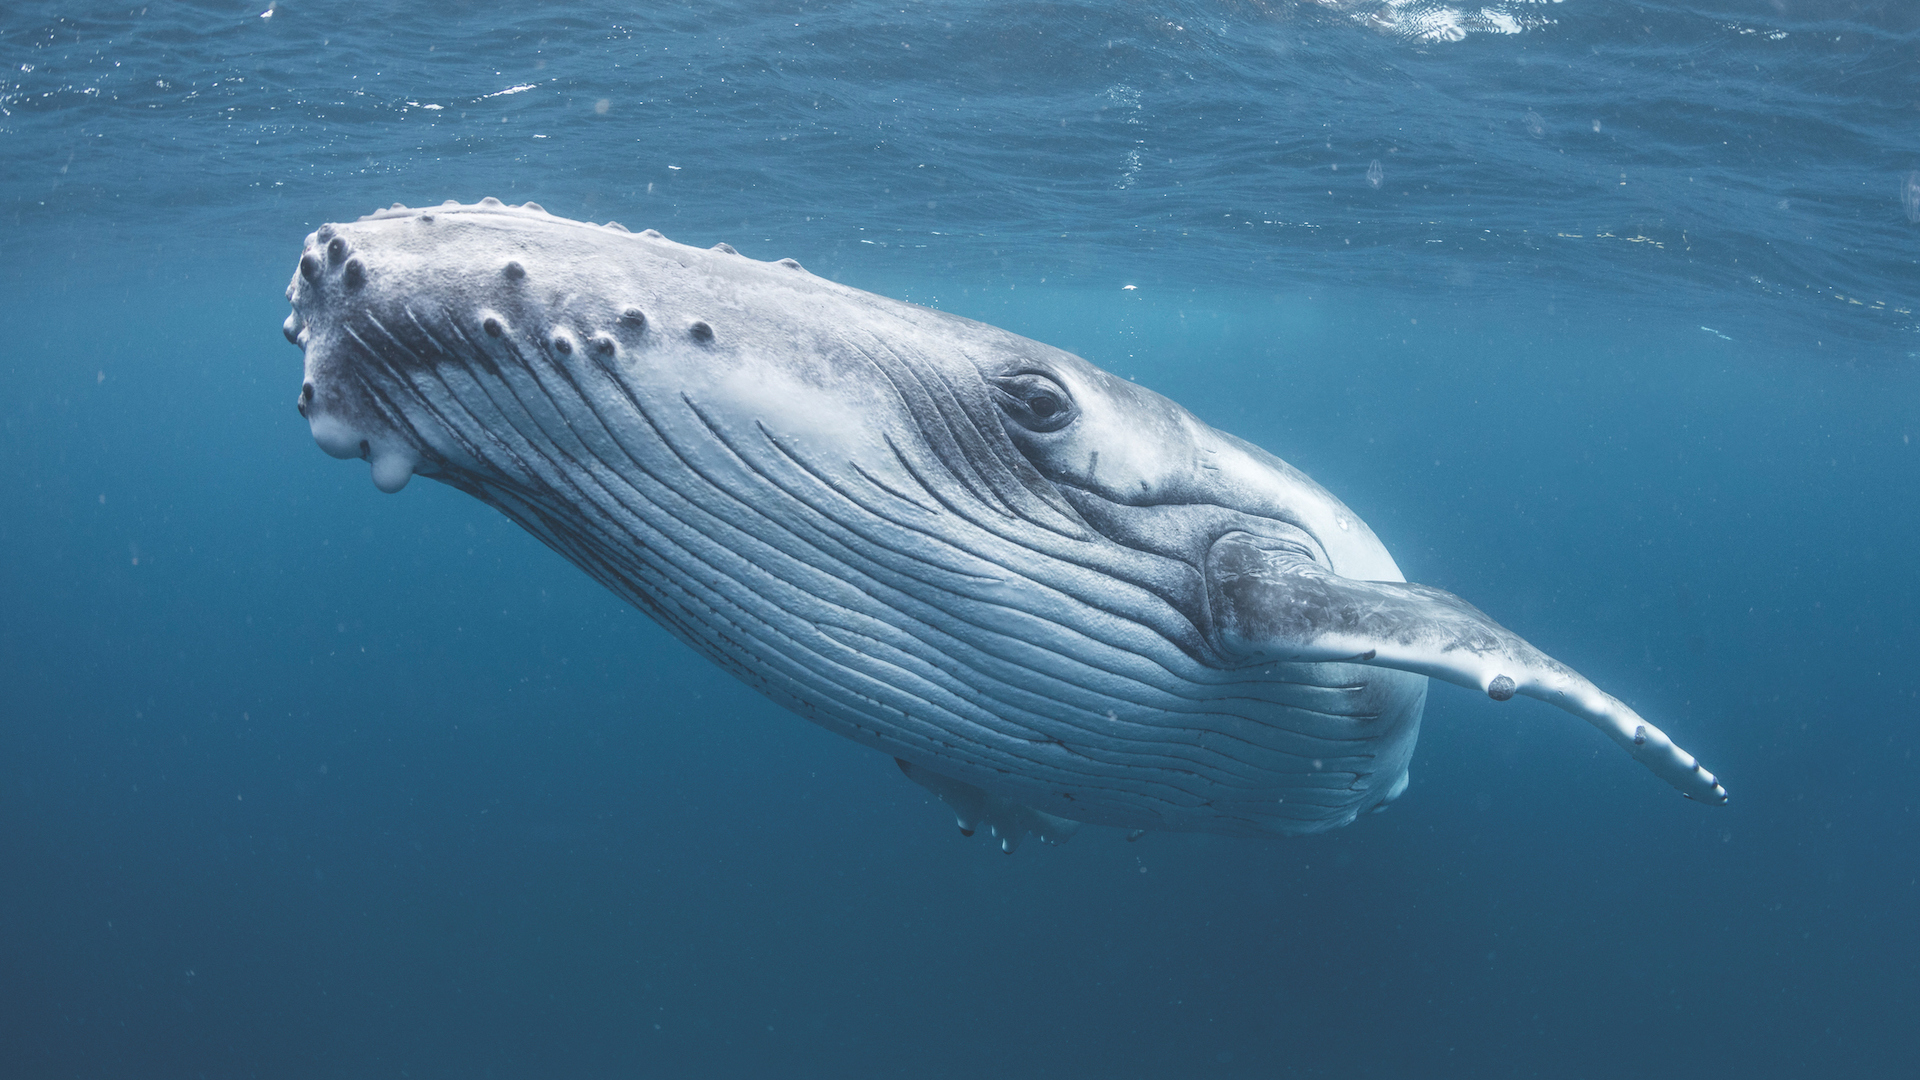 A photograph of a humpback whale in the ocean